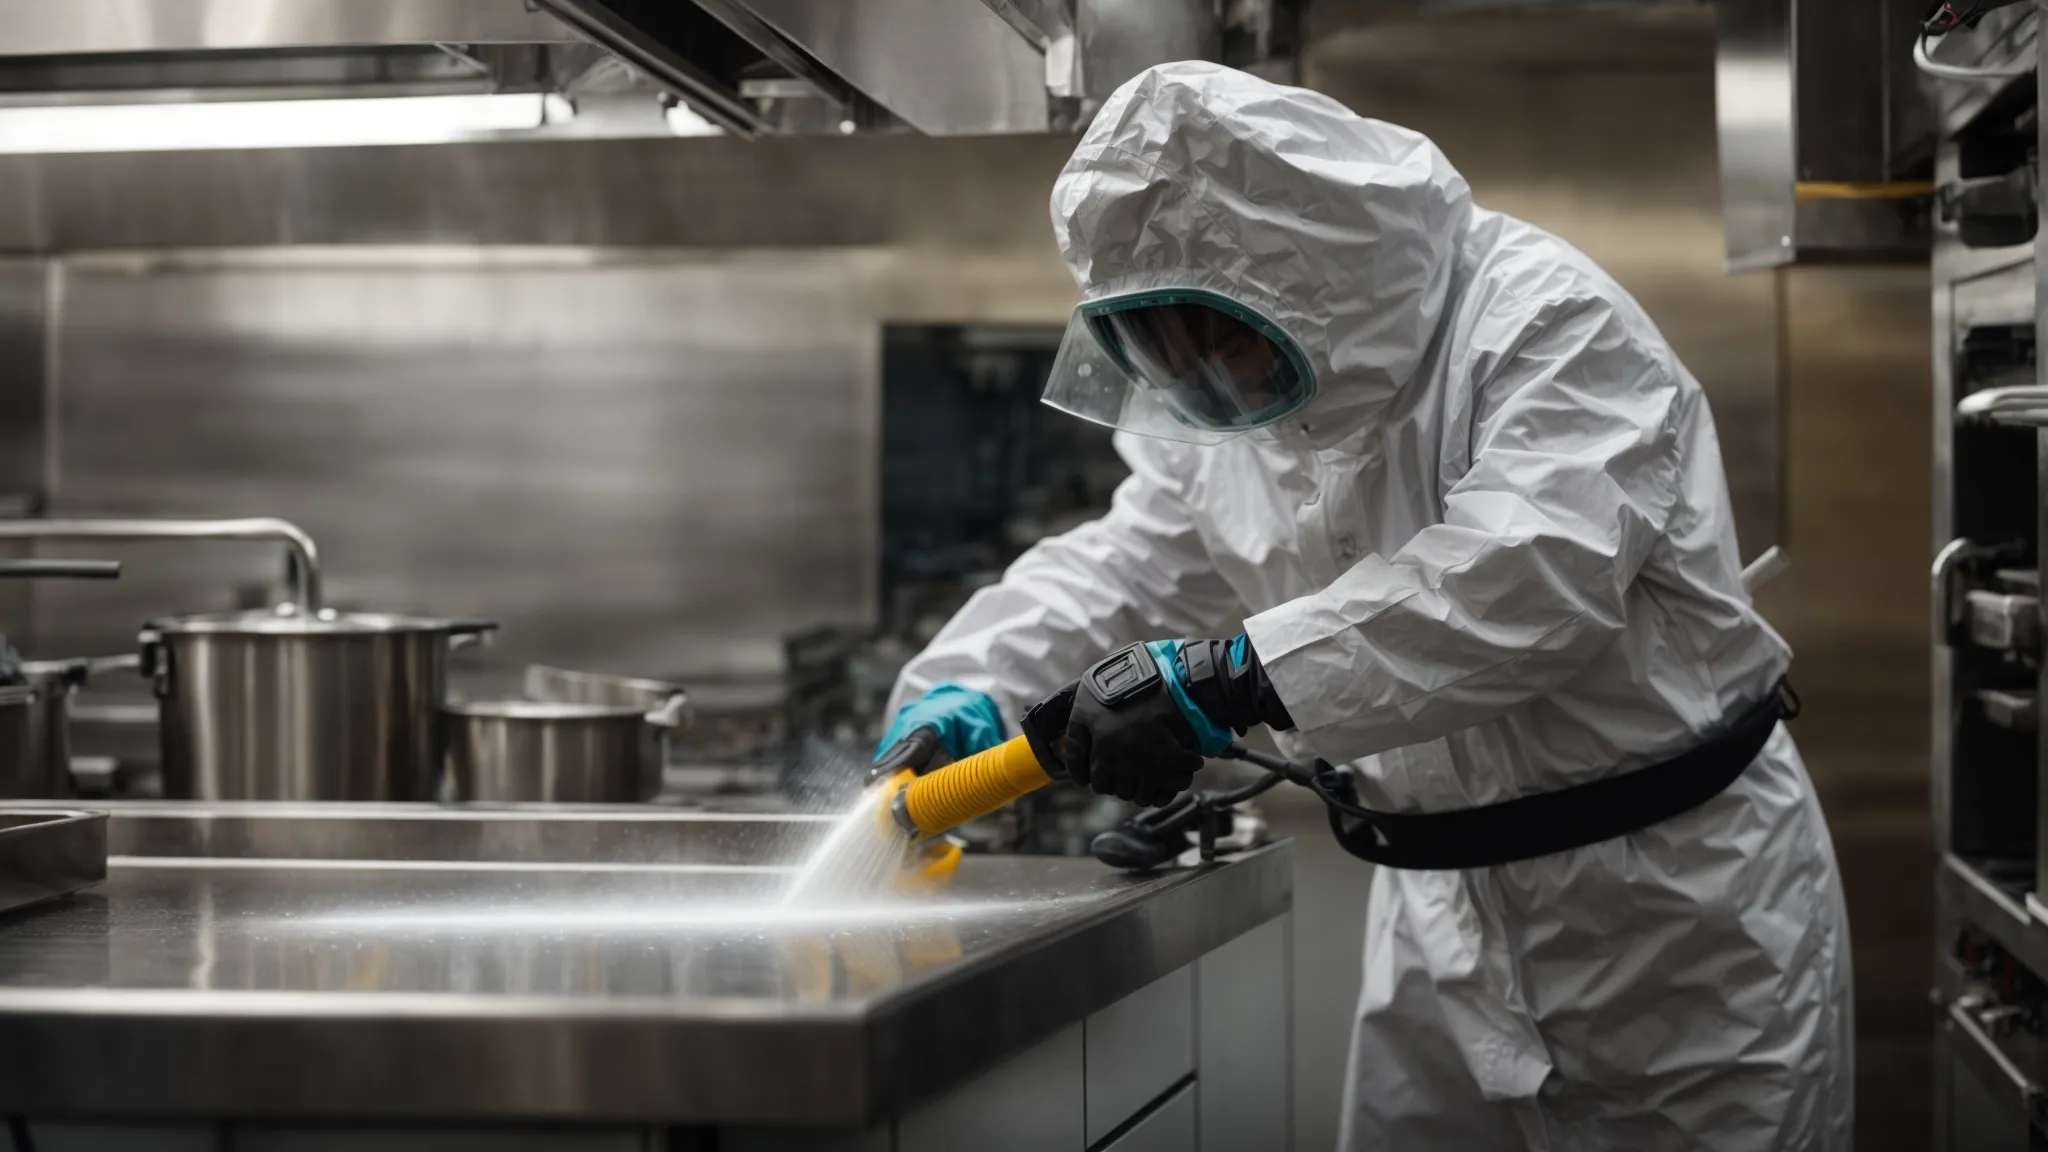 a professional in protective gear uses a high-pressure washer to clean the interior of a commercial kitchen hood.